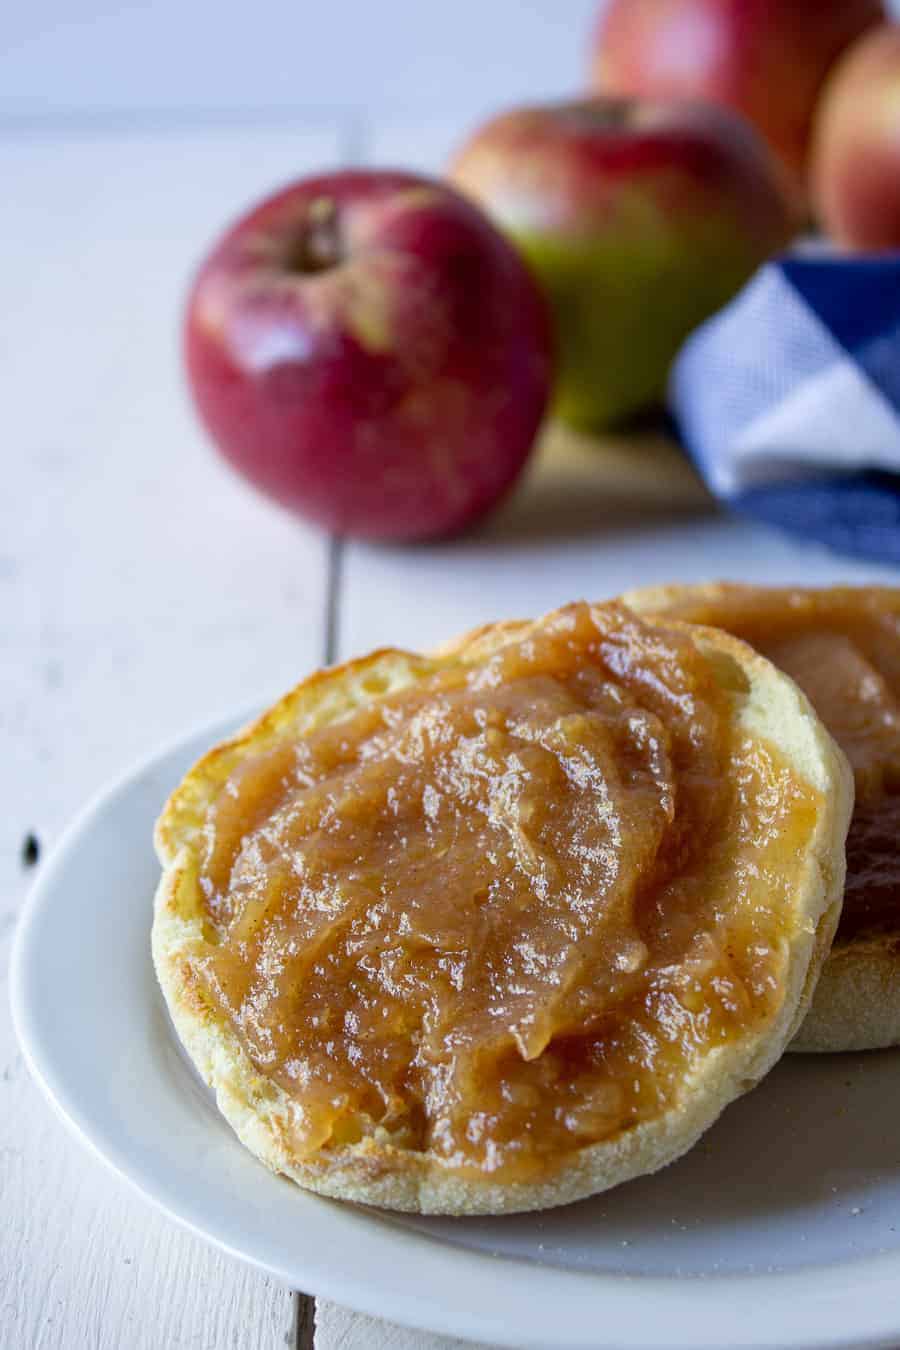 English muffin topped with apple butter.